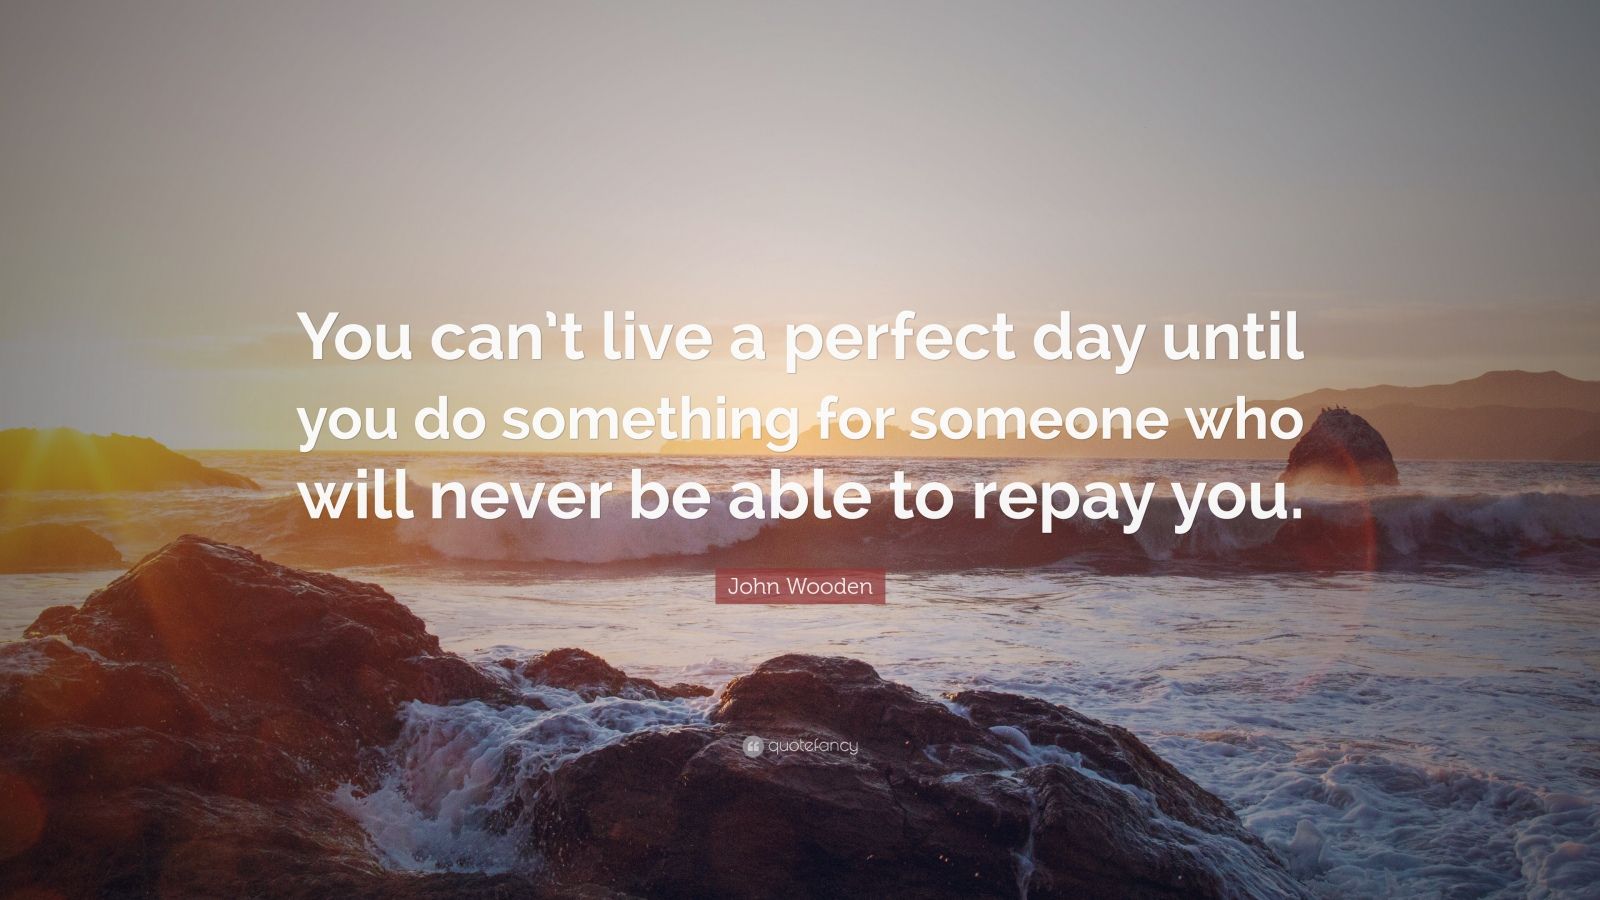 John Wooden Quote: “You can’t live a perfect day until you do something ...